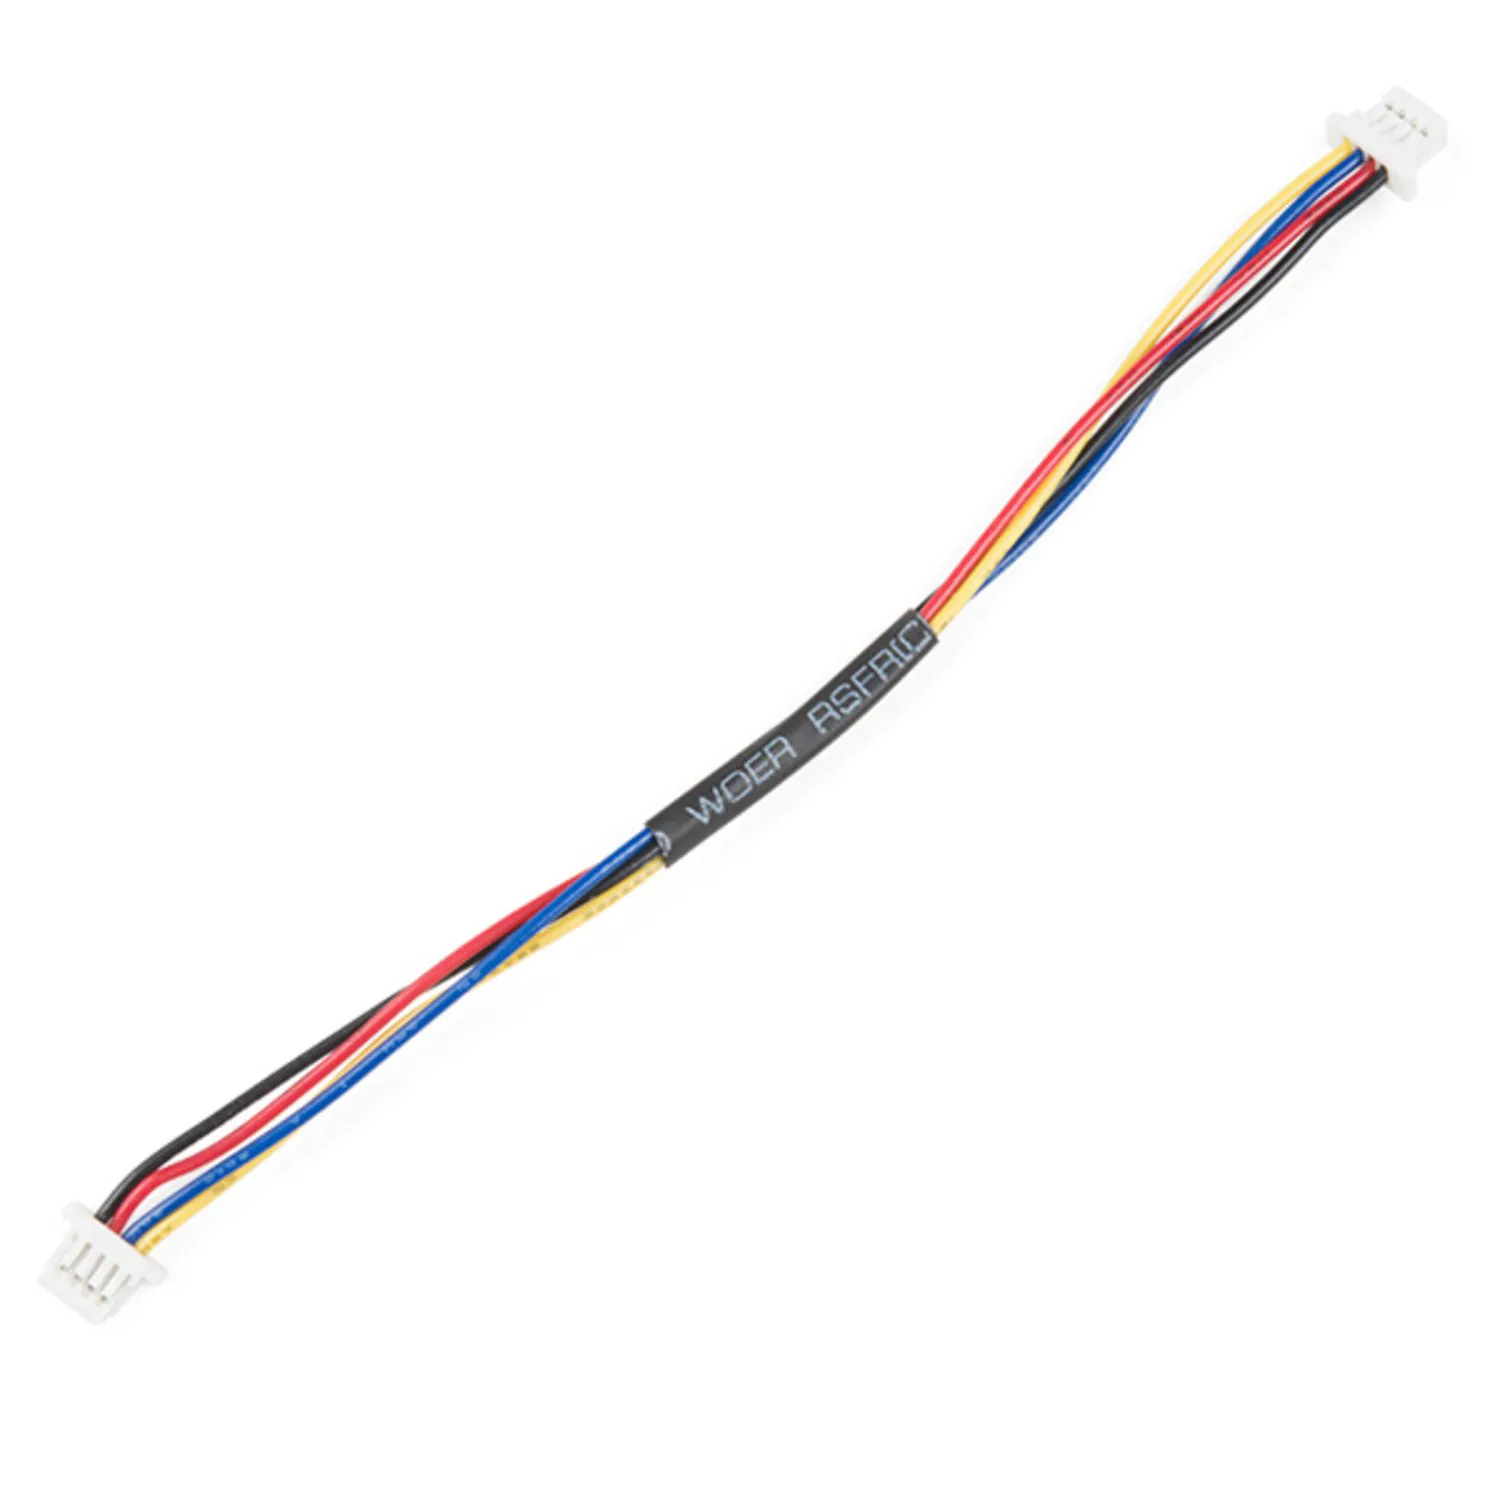 Photo of Qwiic Cable - 100mm